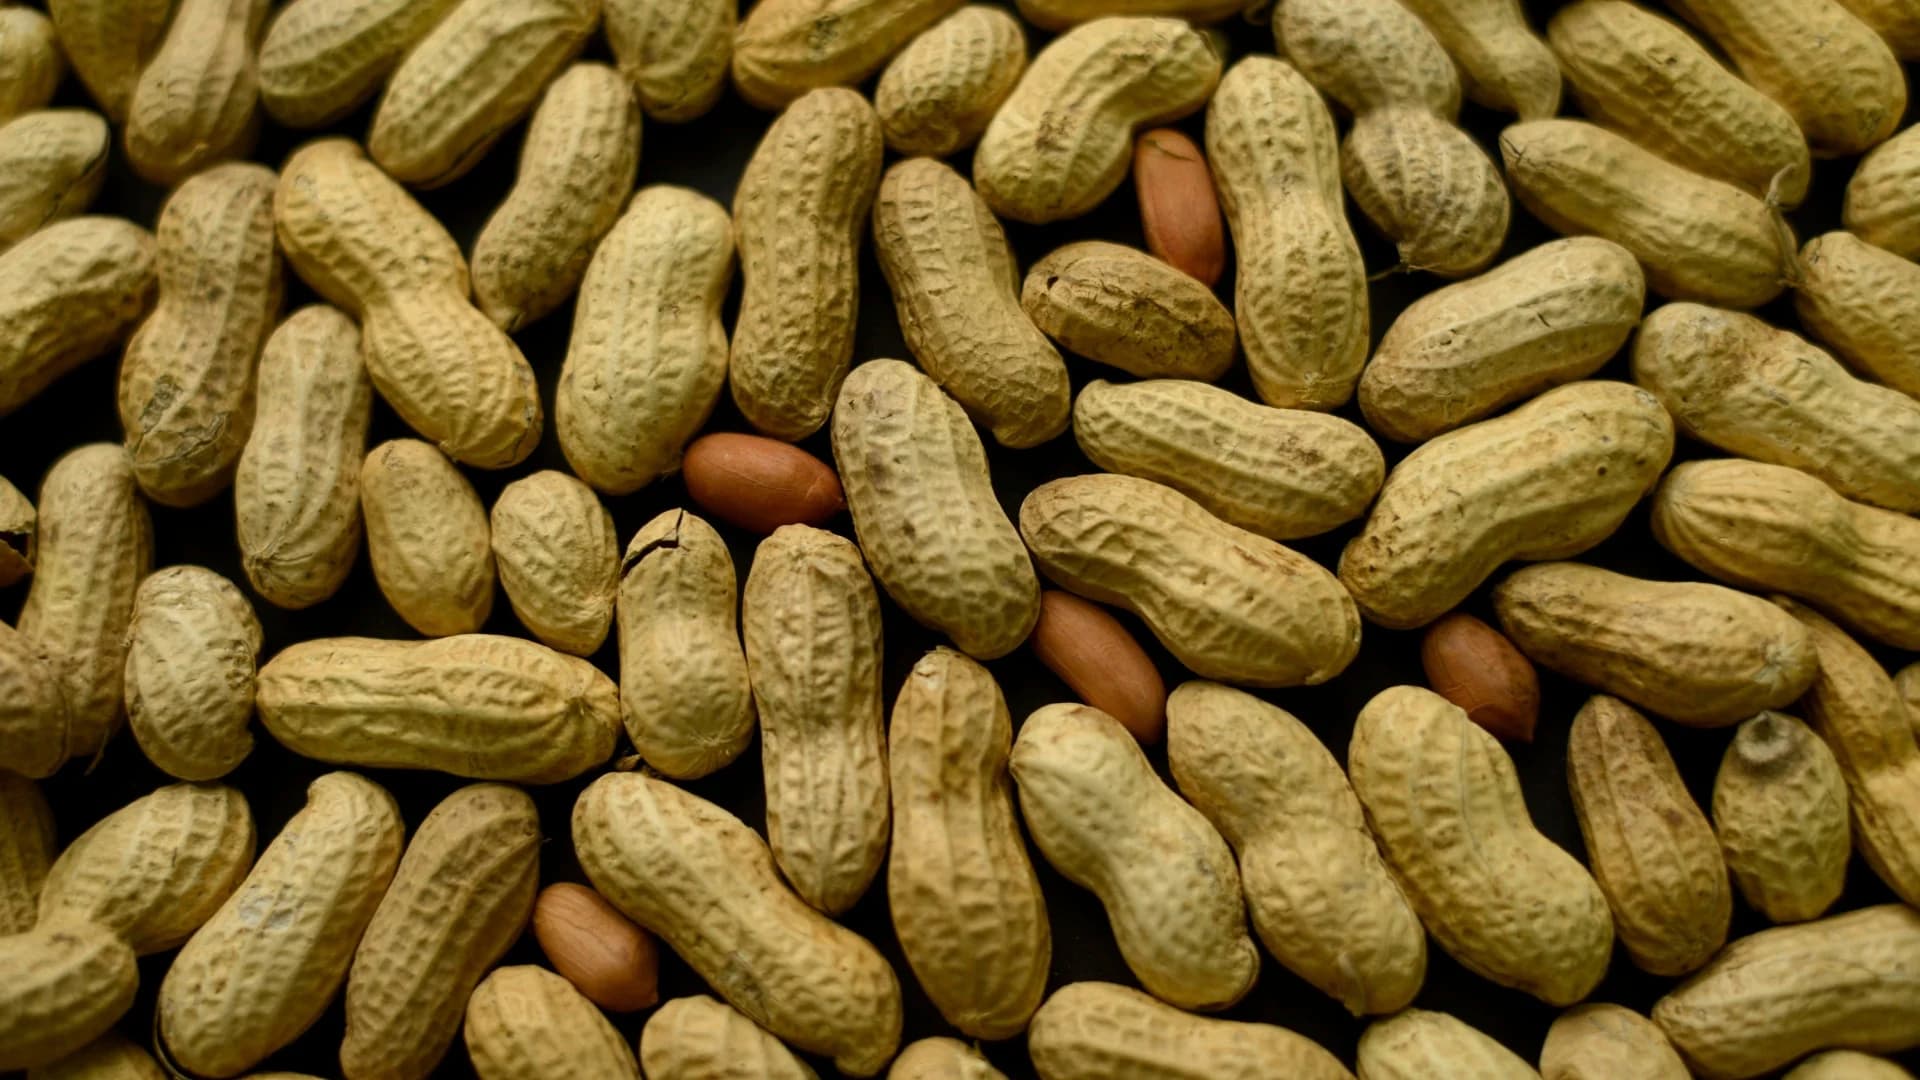 Home treatment guidelines could be key for those suffering food allergies during pandemic